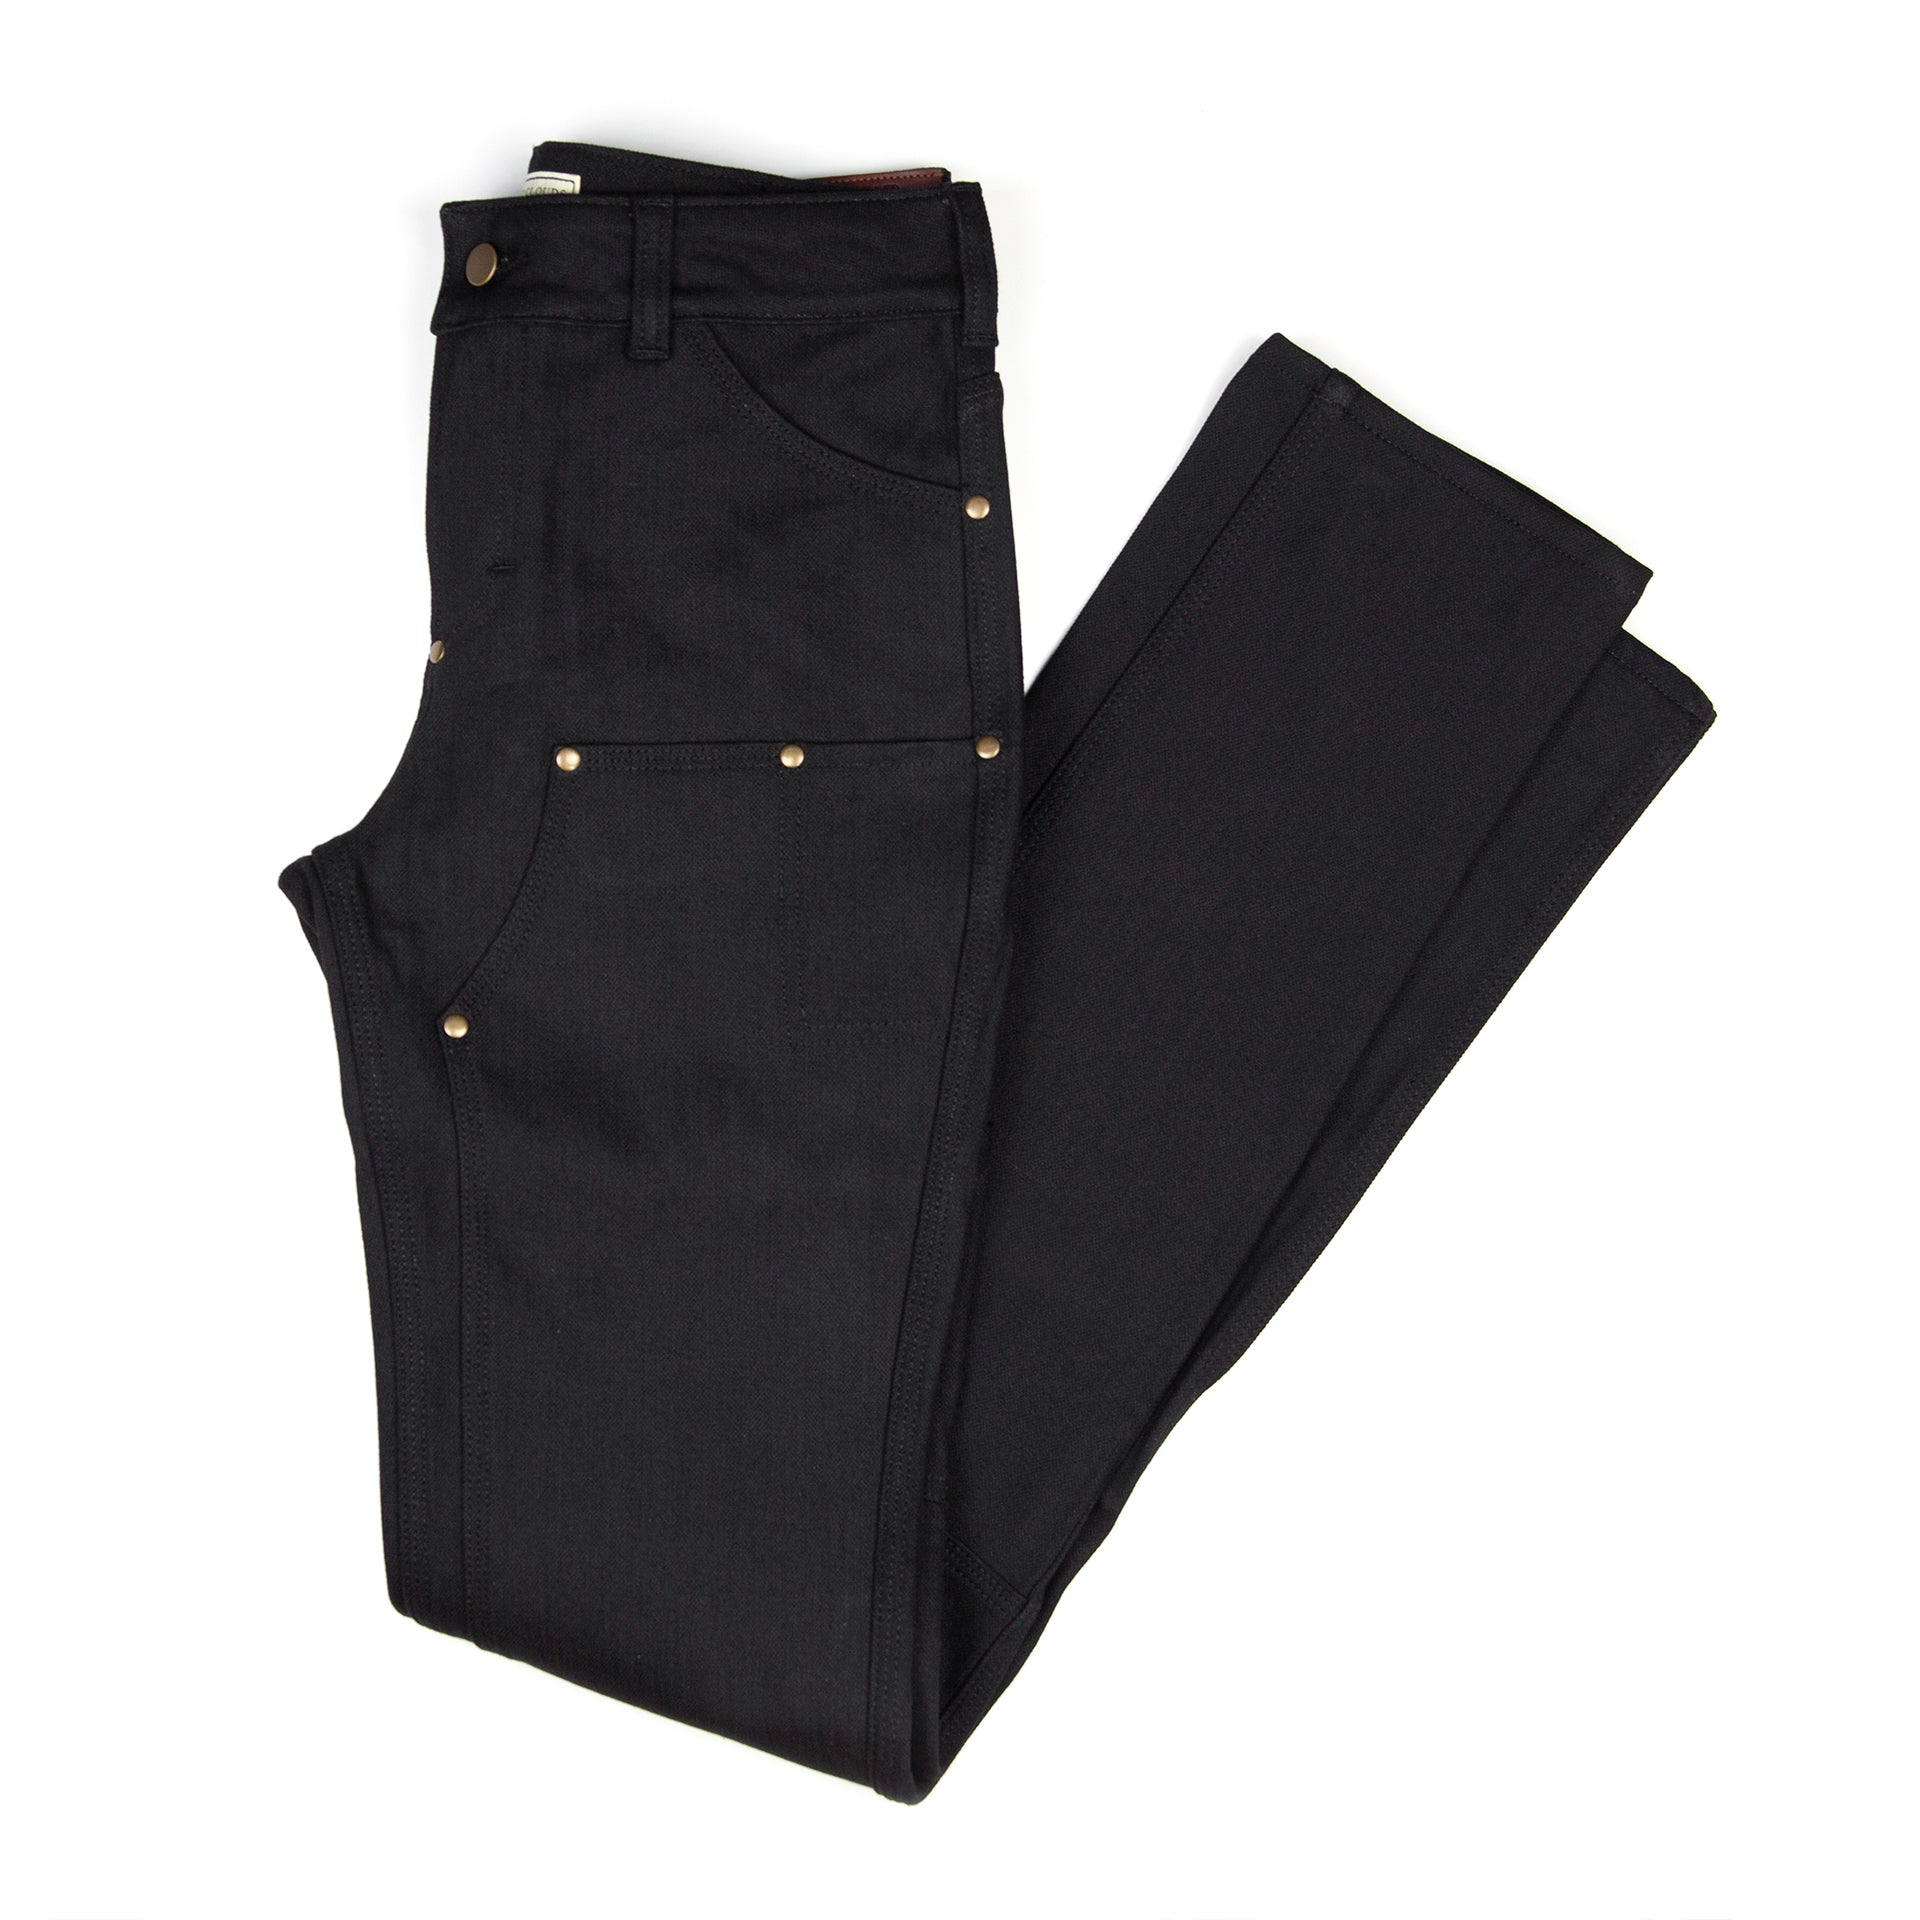 GN.05 Women's Fitted Work Pant - Dyneema Denim